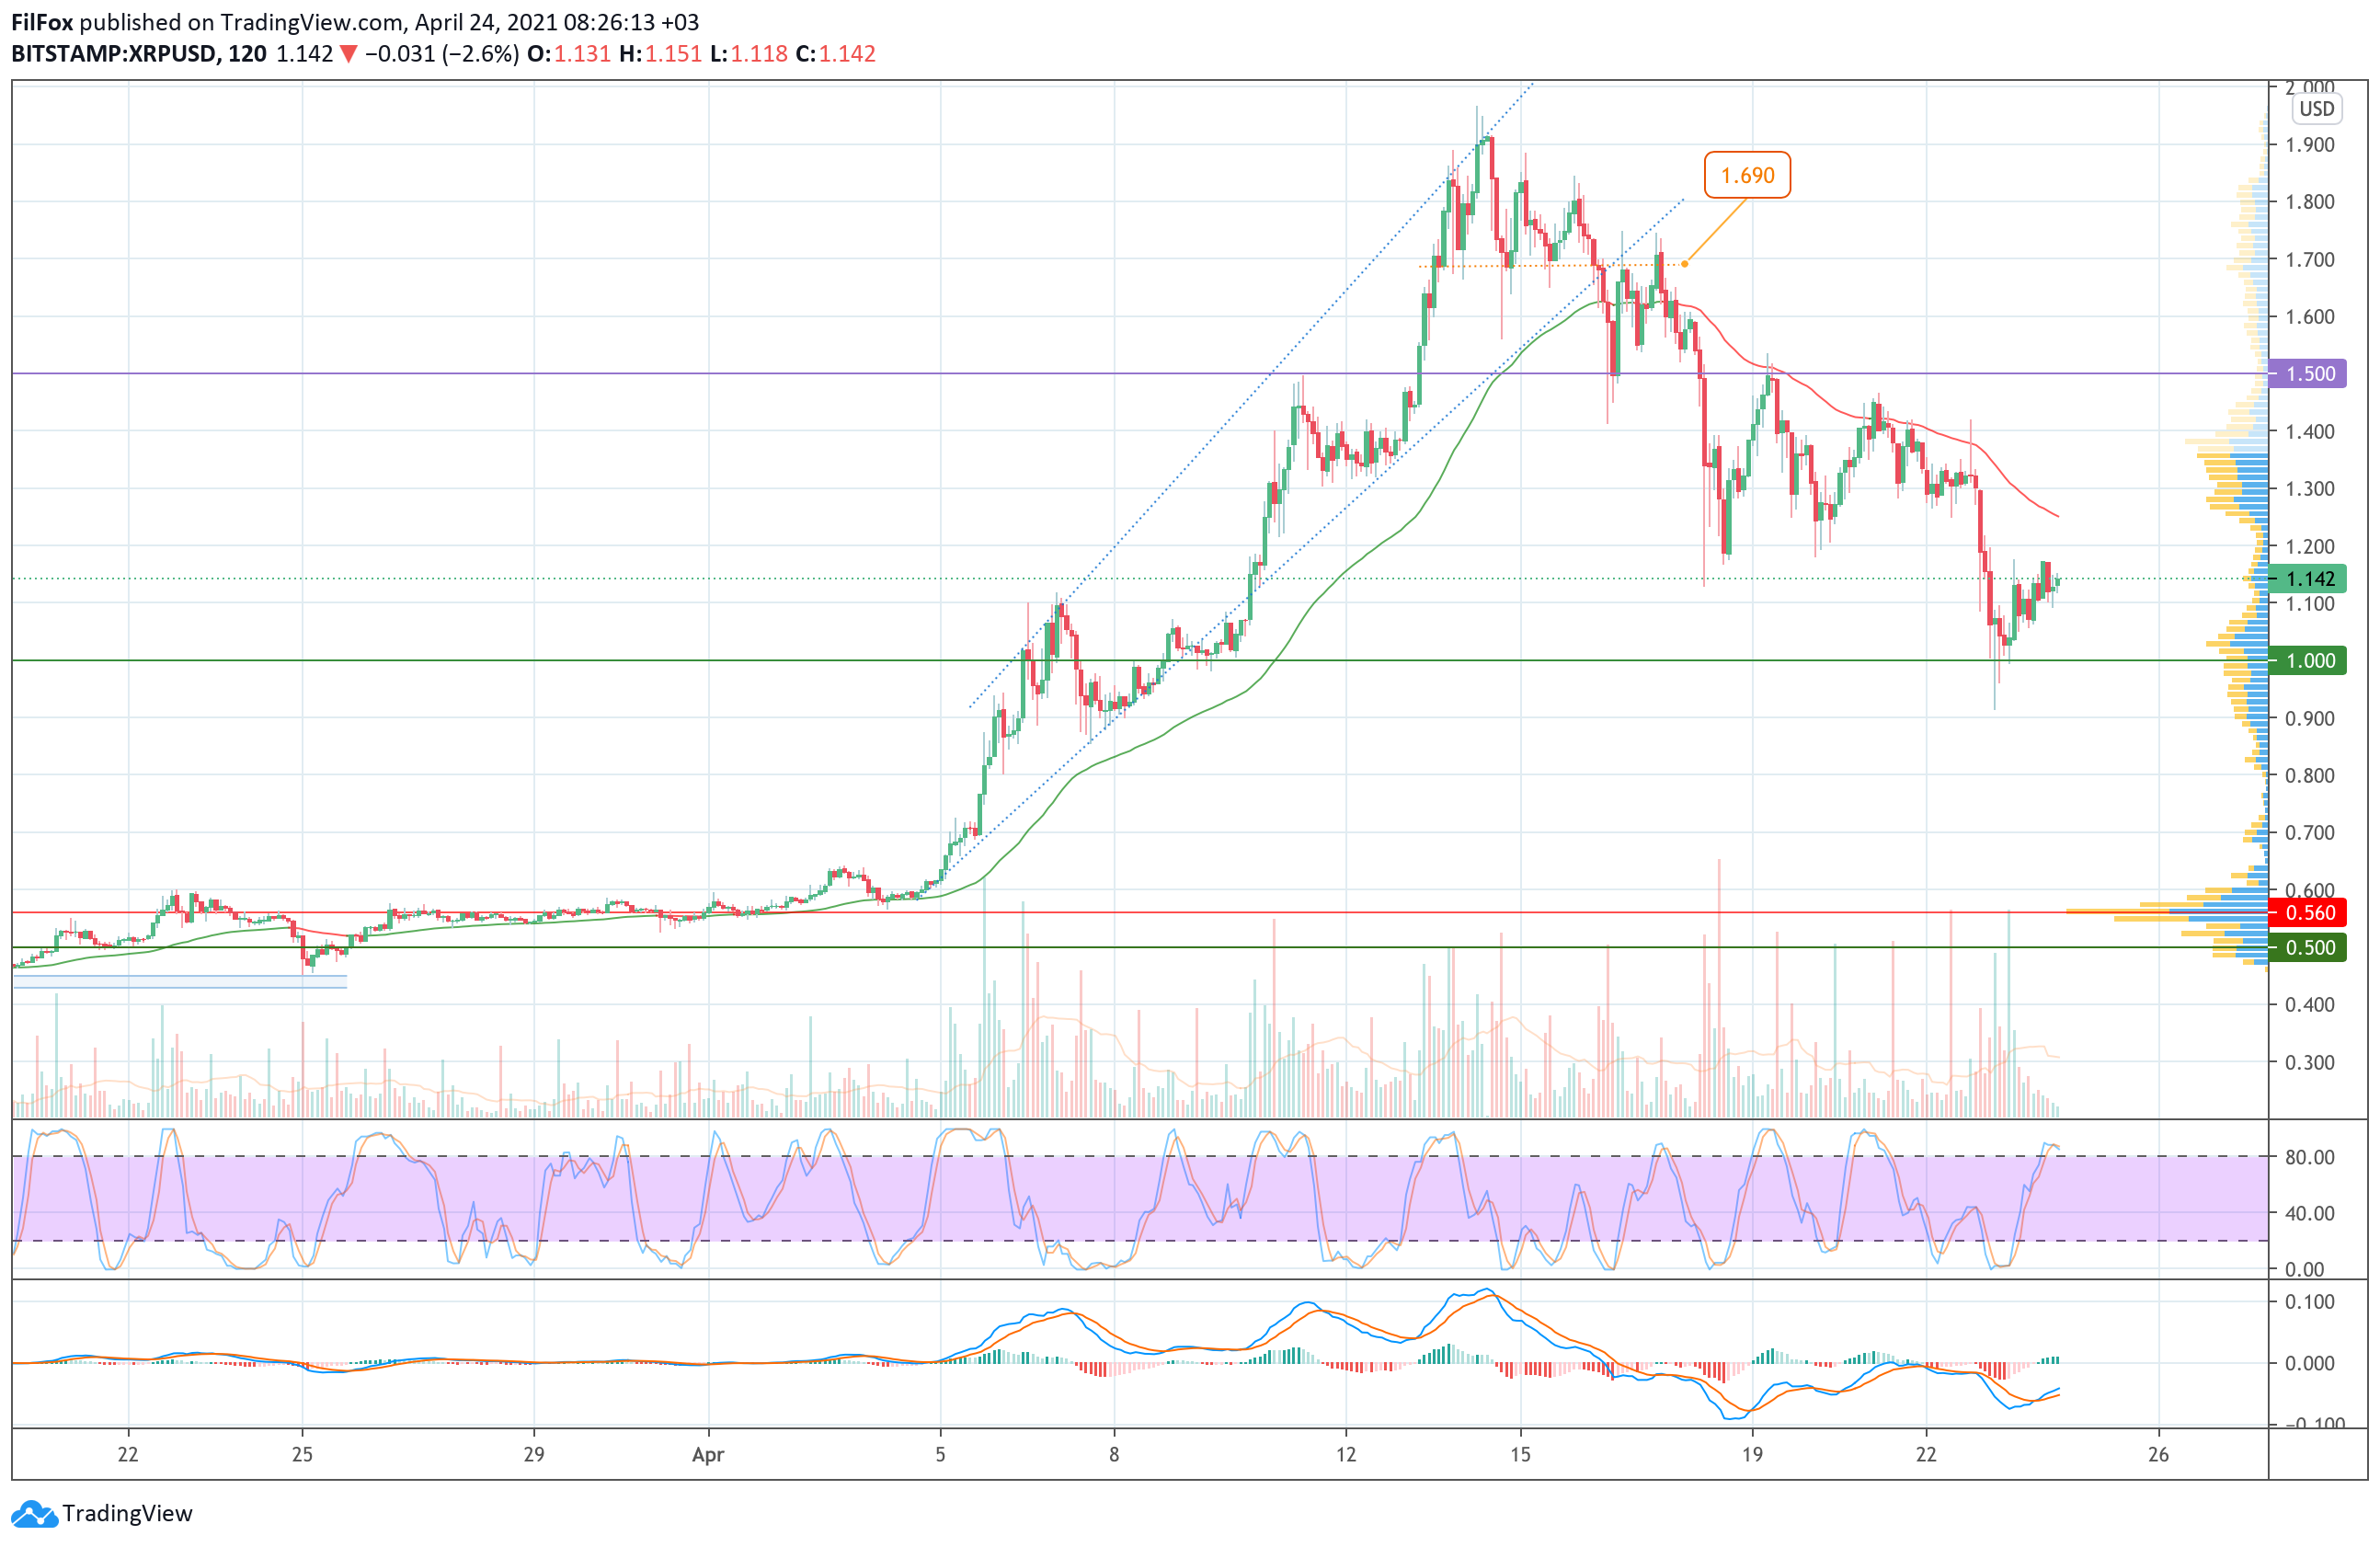 Analysis of the prices of Bitcoin, Ethereum, XRP for 04/24/2021